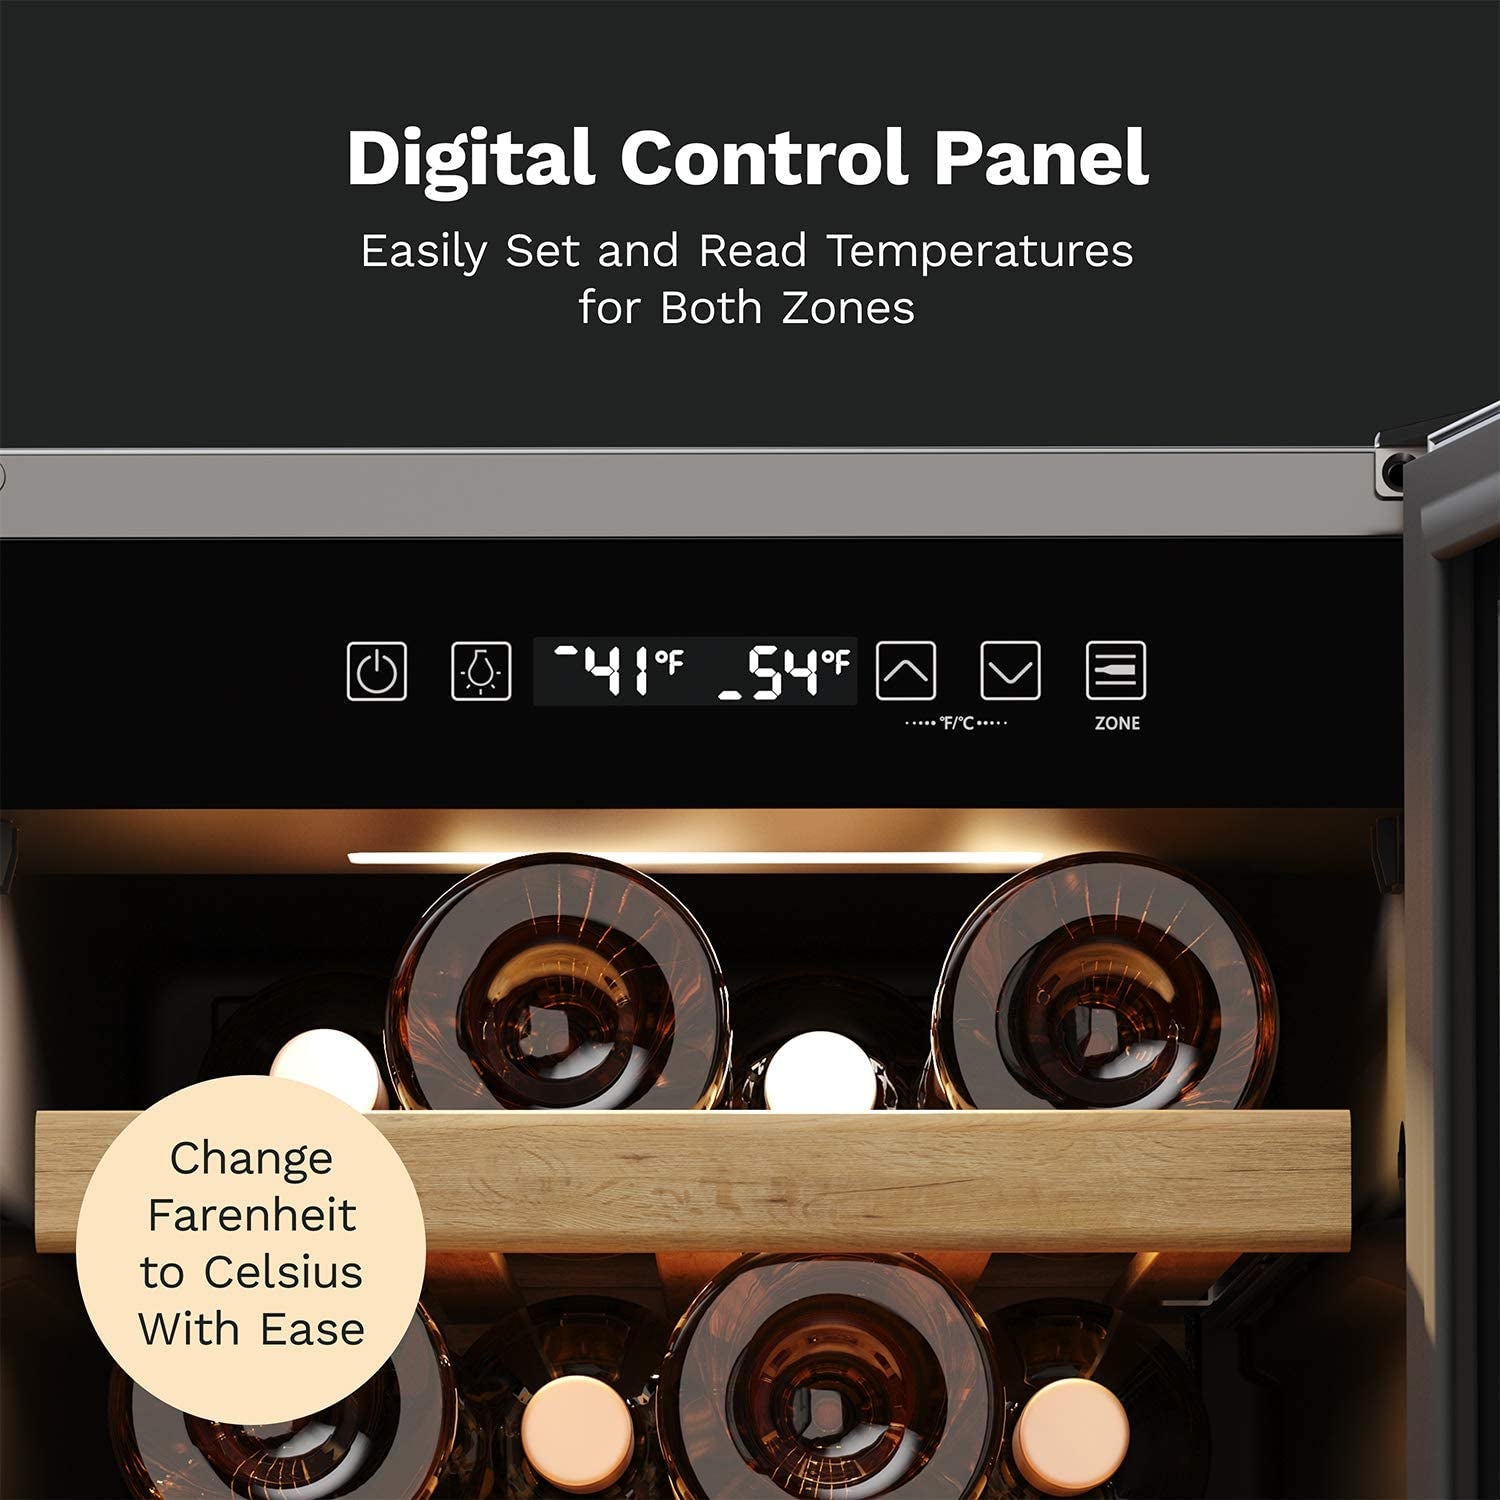 25 Bottles High-End Wine Cooler - Standalone Dual-Zone Mini Fridge and Chiller for Wines with Temperature Control Panel, Stainless Steel Reversible Door Swing and Removable Wood Shelves